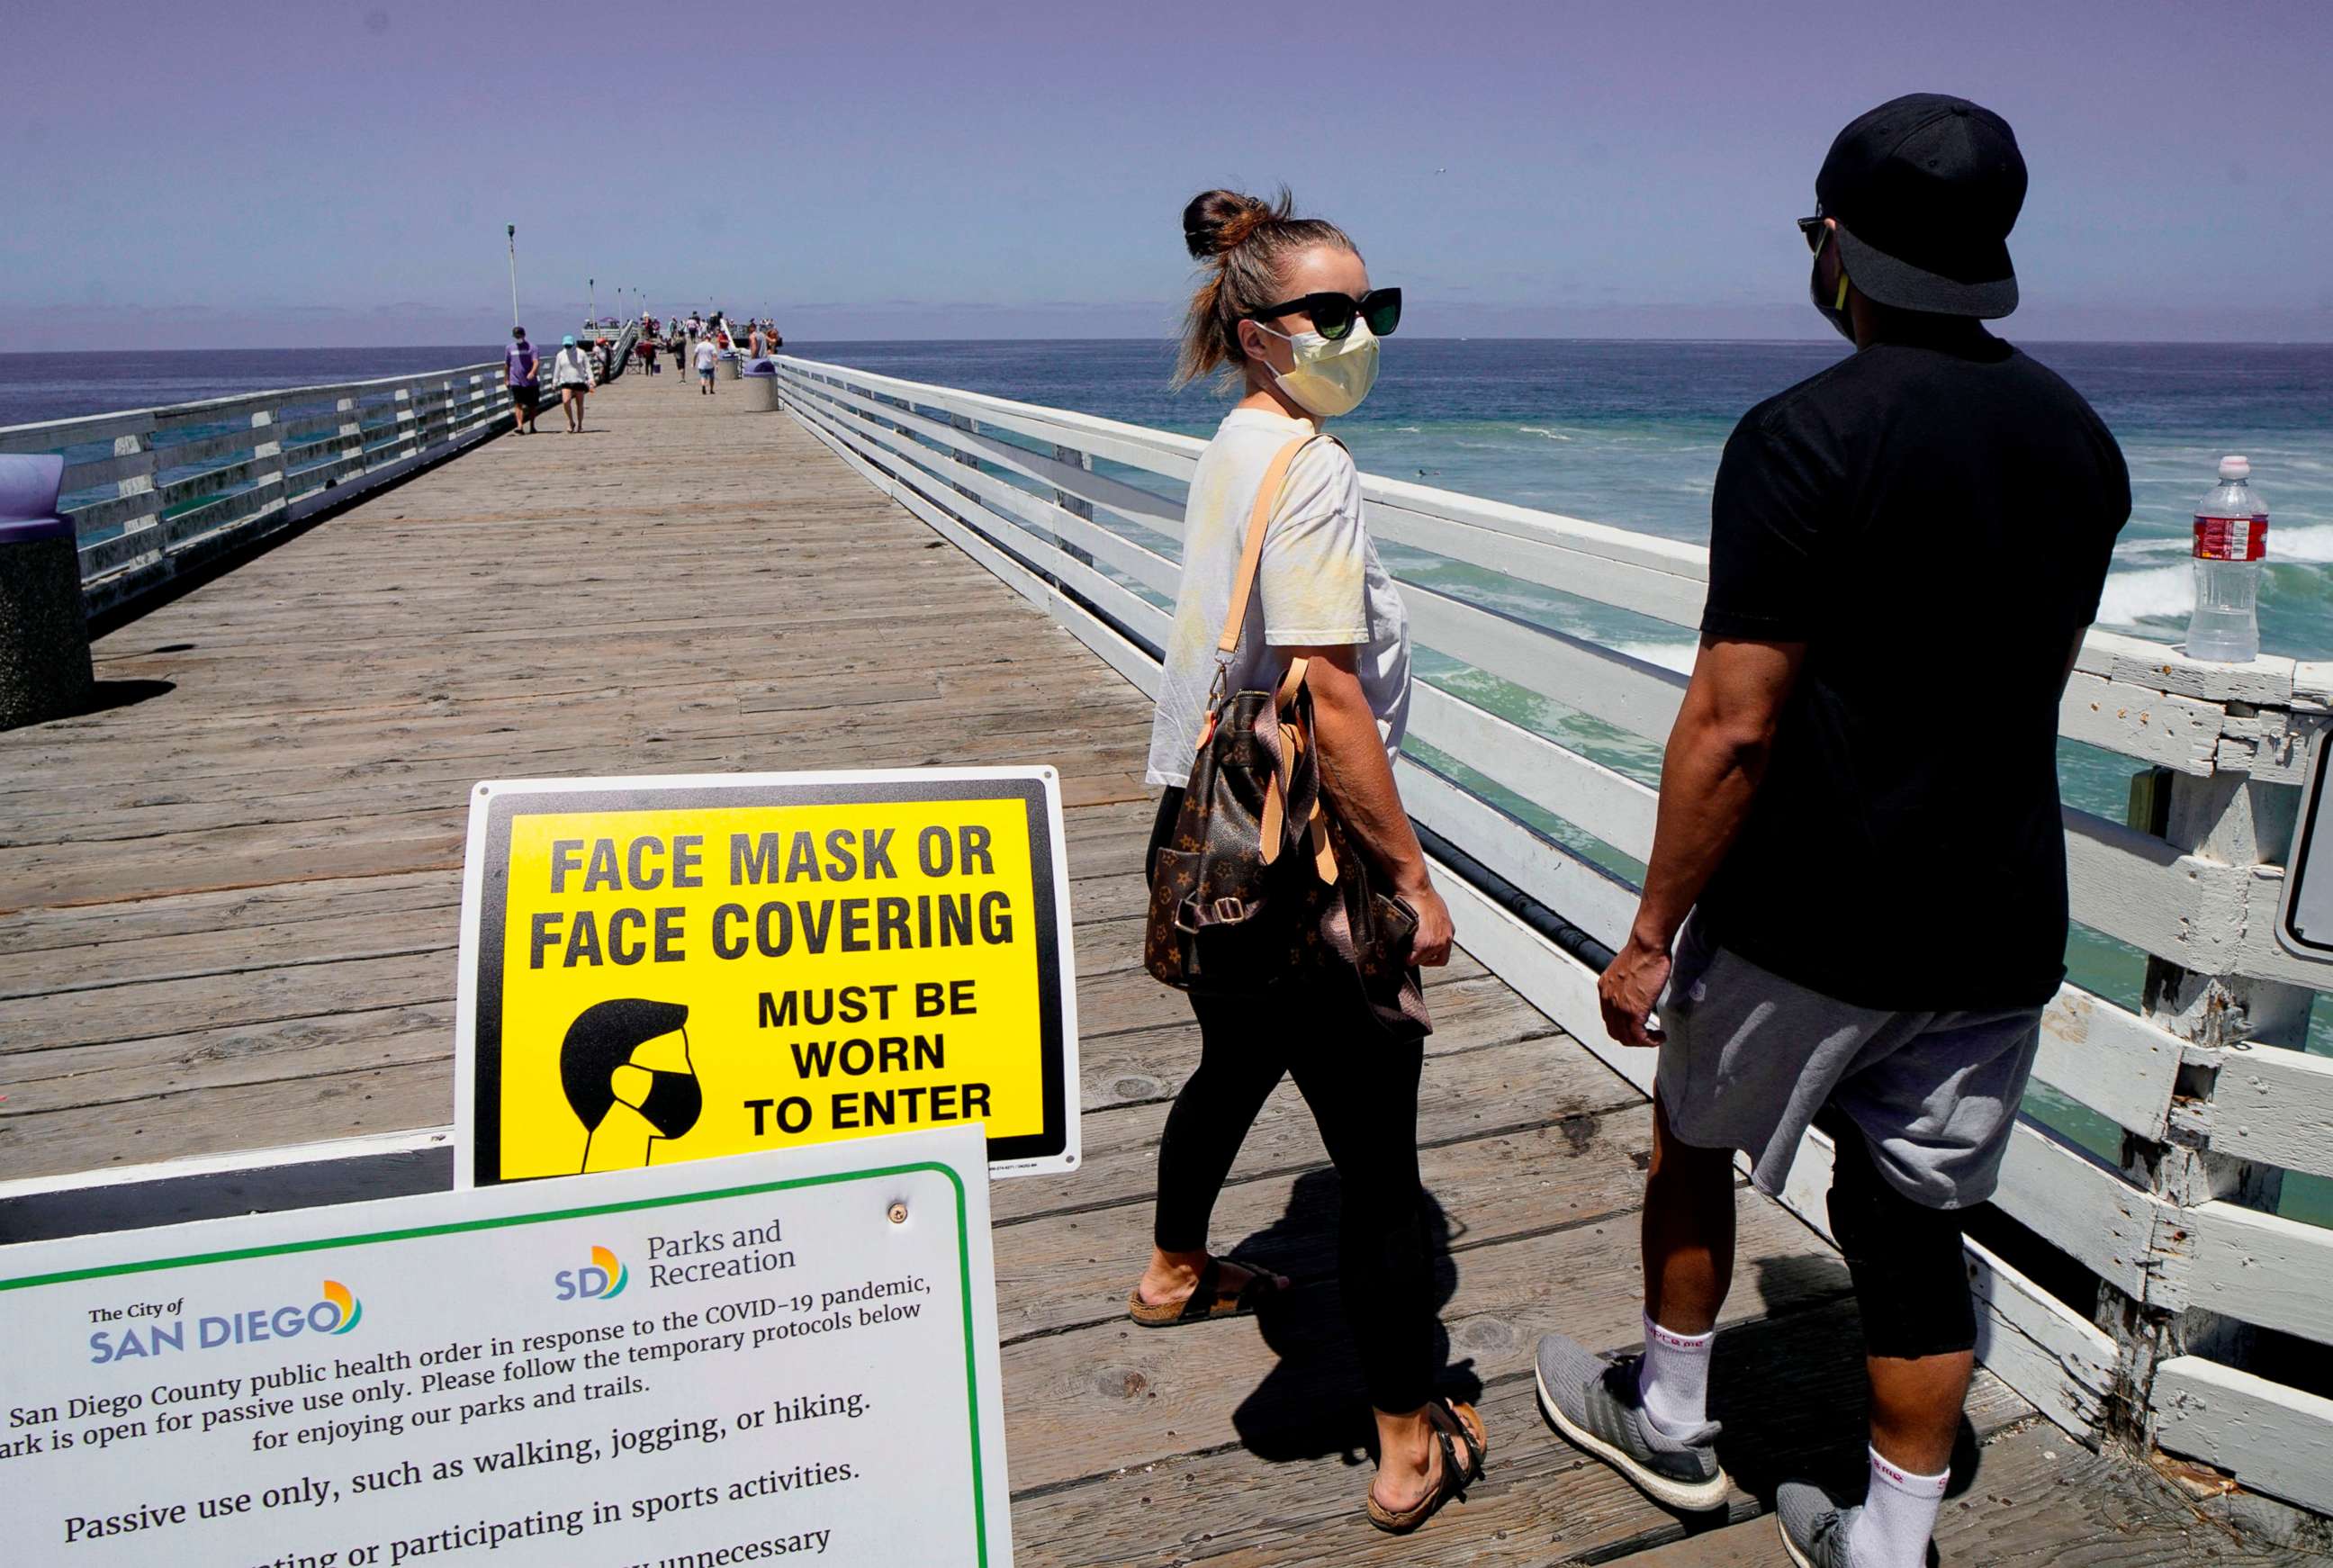 PHOTO: BBeachgoers walk out onto the Pacific Beach Pier in San Diego, Calif., on July 4, 2020, amid the coronavirus pandemic.